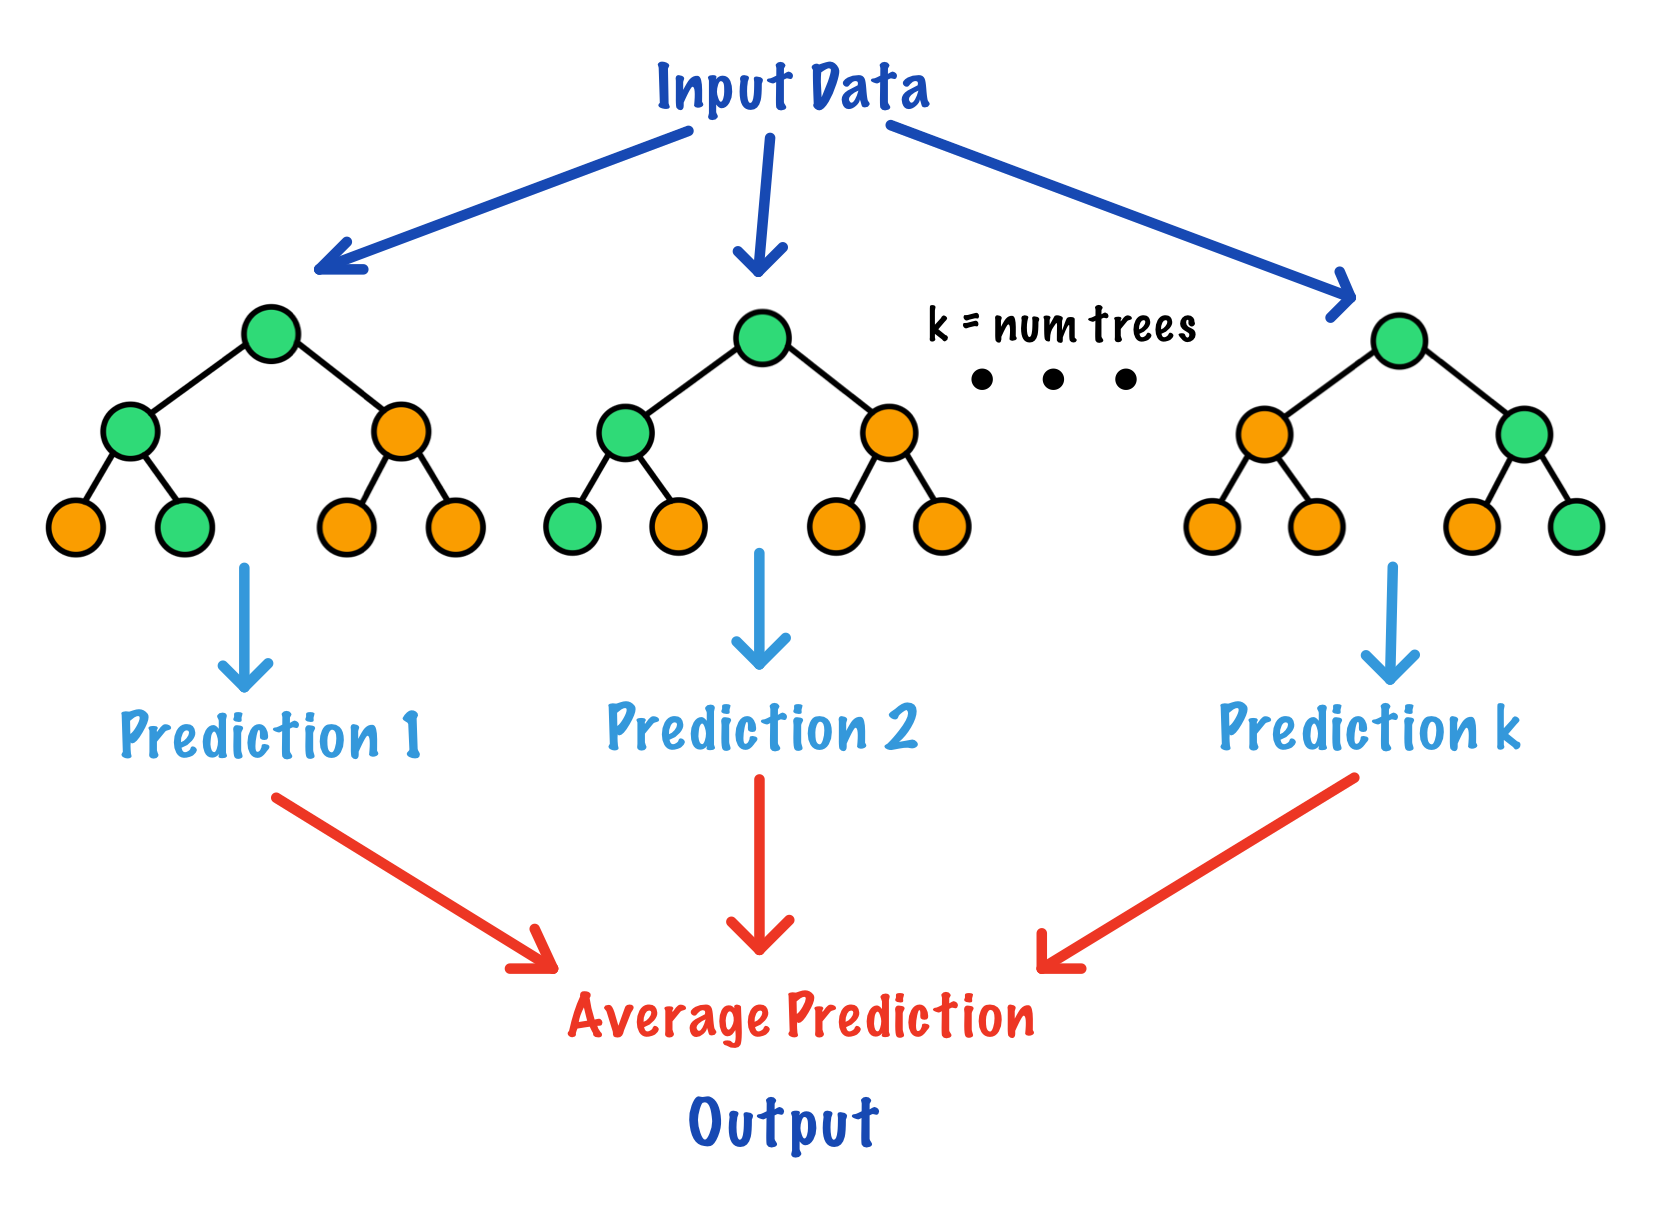 The basic infrastructure of a random forest model consists of an ensemble of uncorrelated decision trees that work together to make predictions on an outcome of interest.